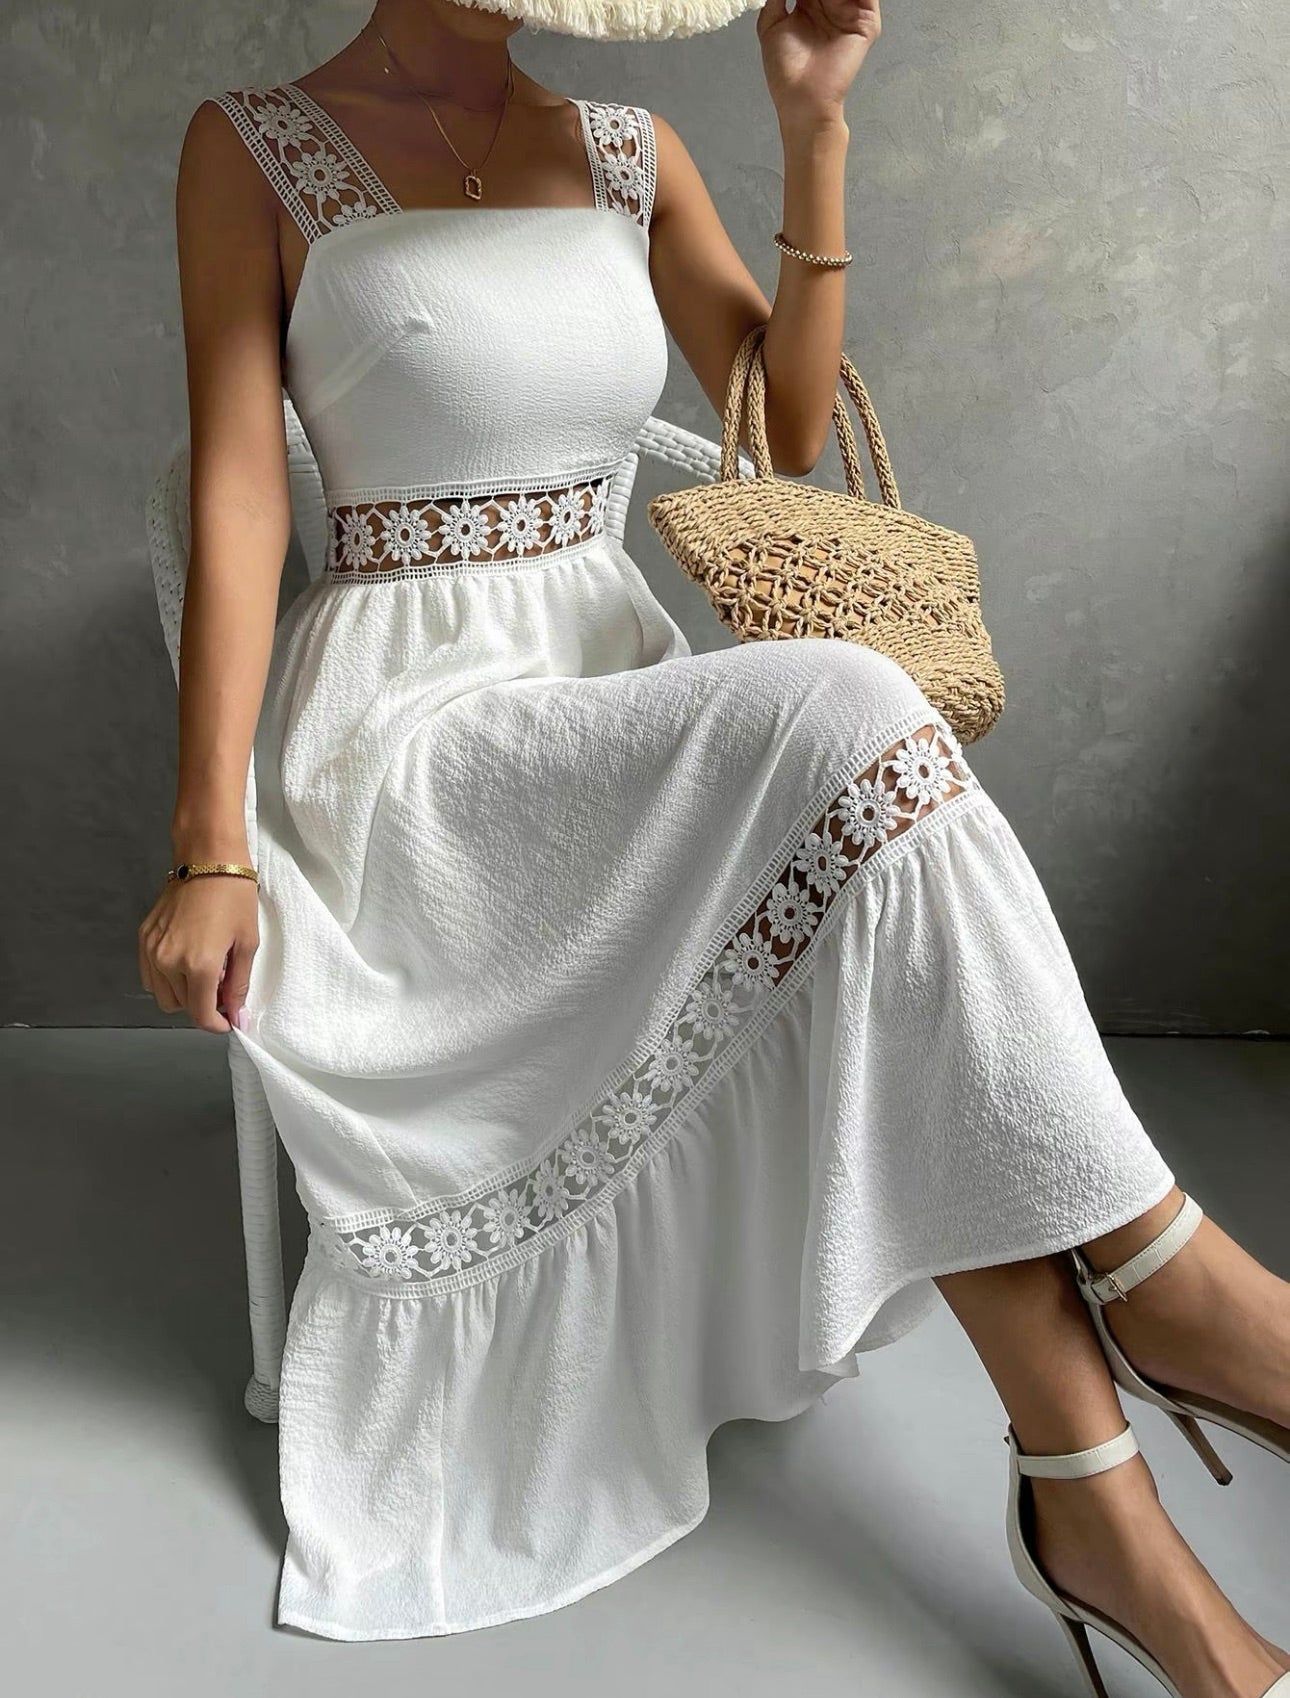 Women's Contrast Lace Flower Decor Hollow Out A Line Dress, Casual Sleeveless Square Neck Long Dress for Summer